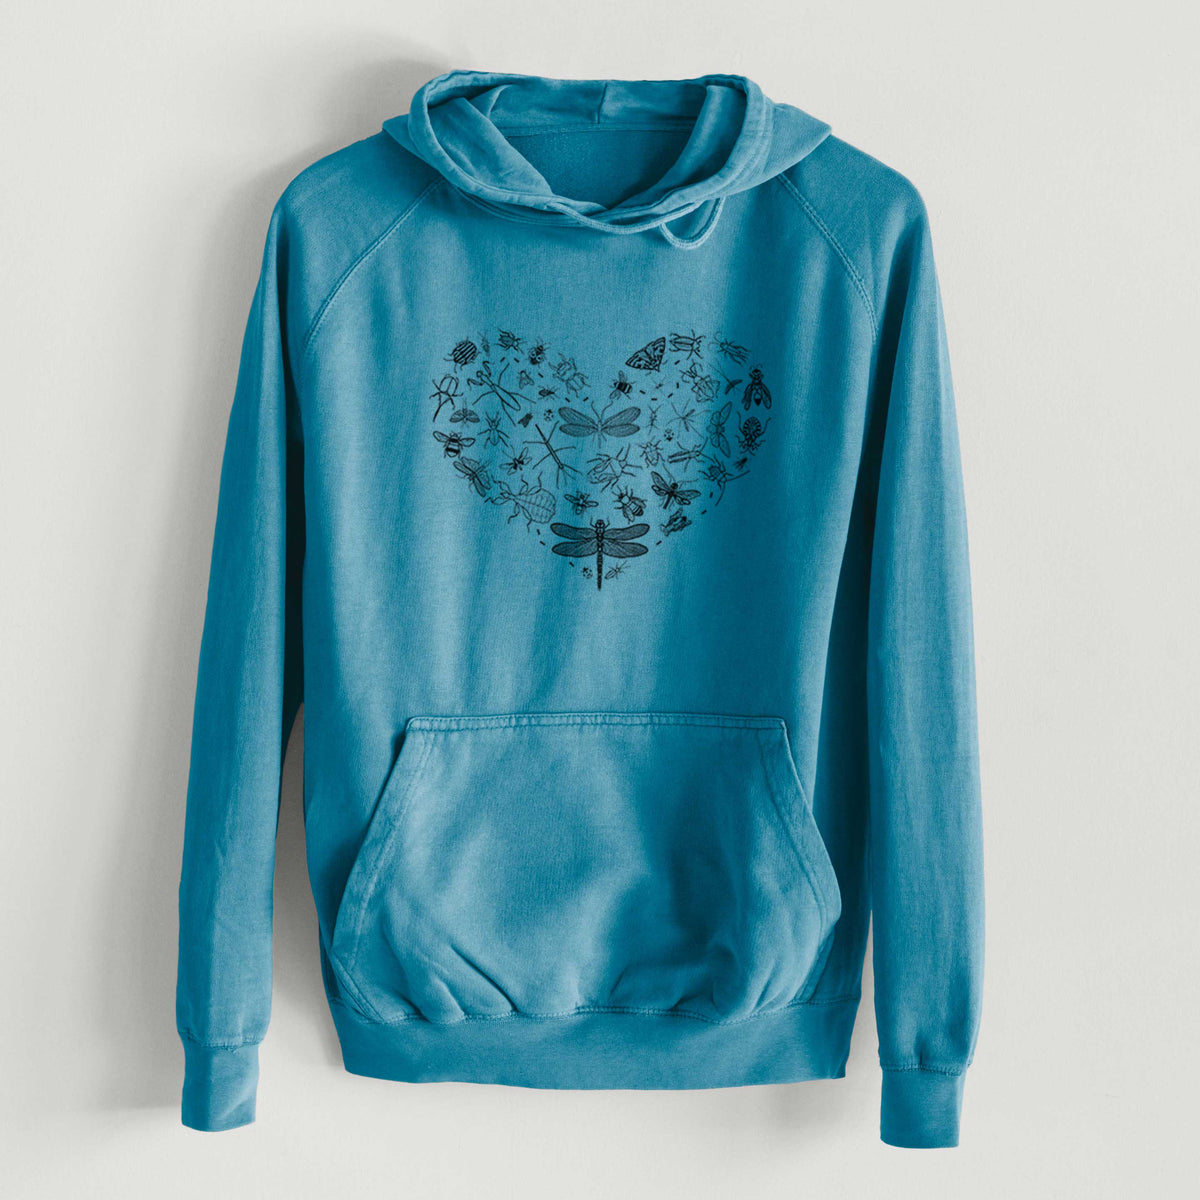 Heart Full of Insects  - Mid-Weight Unisex Vintage 100% Cotton Hoodie